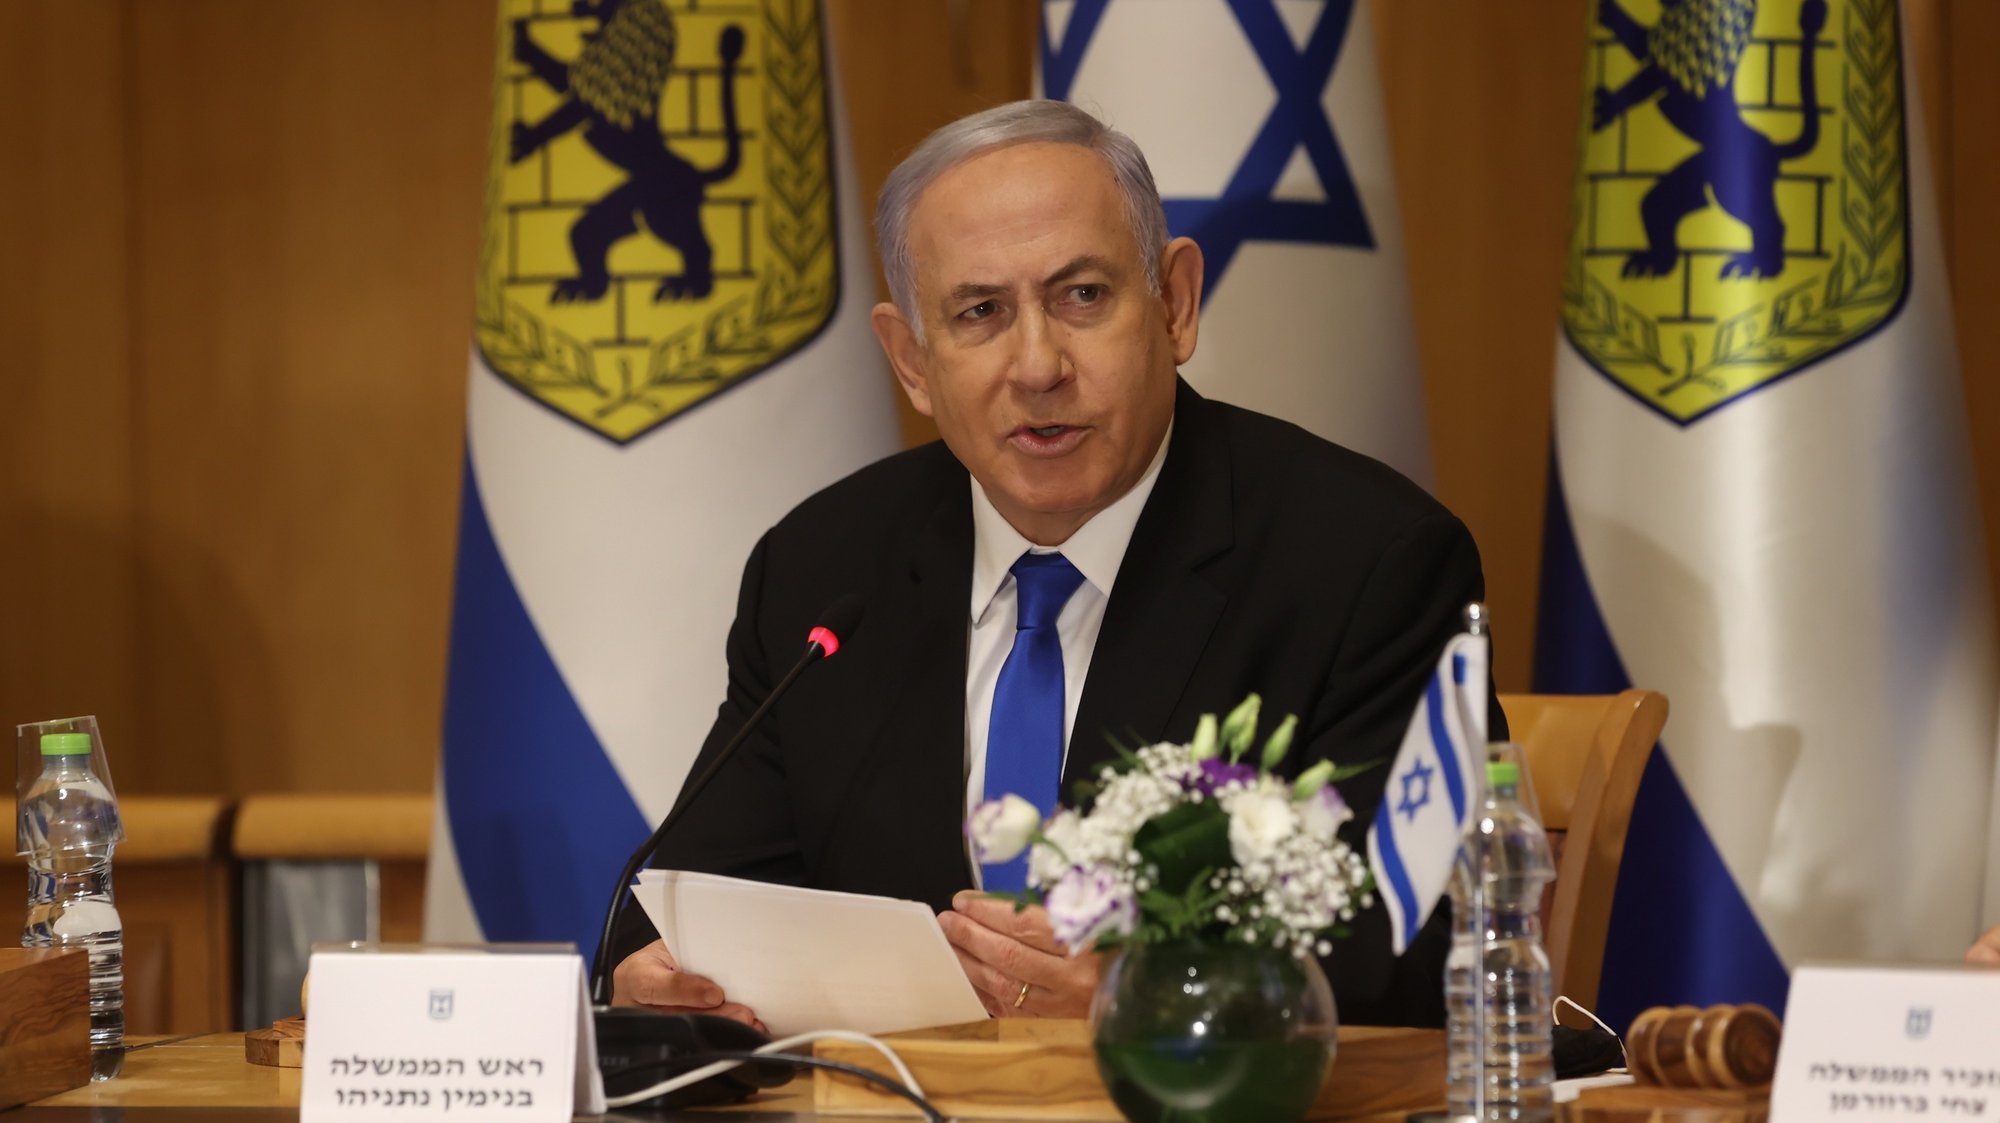 epa09187400 Israeli Prime Minister Benjamin Netanyahu  during a special cabinet meeting on the occasion of Jerusalem Day in Jerusalem, Israel, 09 May 2021. Jerusalem Day is an Israeli national holiday that celebrates the establishment of Israeli control over the Old City in the aftermath of the June 1967 Six-Day War.  EPA/AMIT SHABI/ POOL